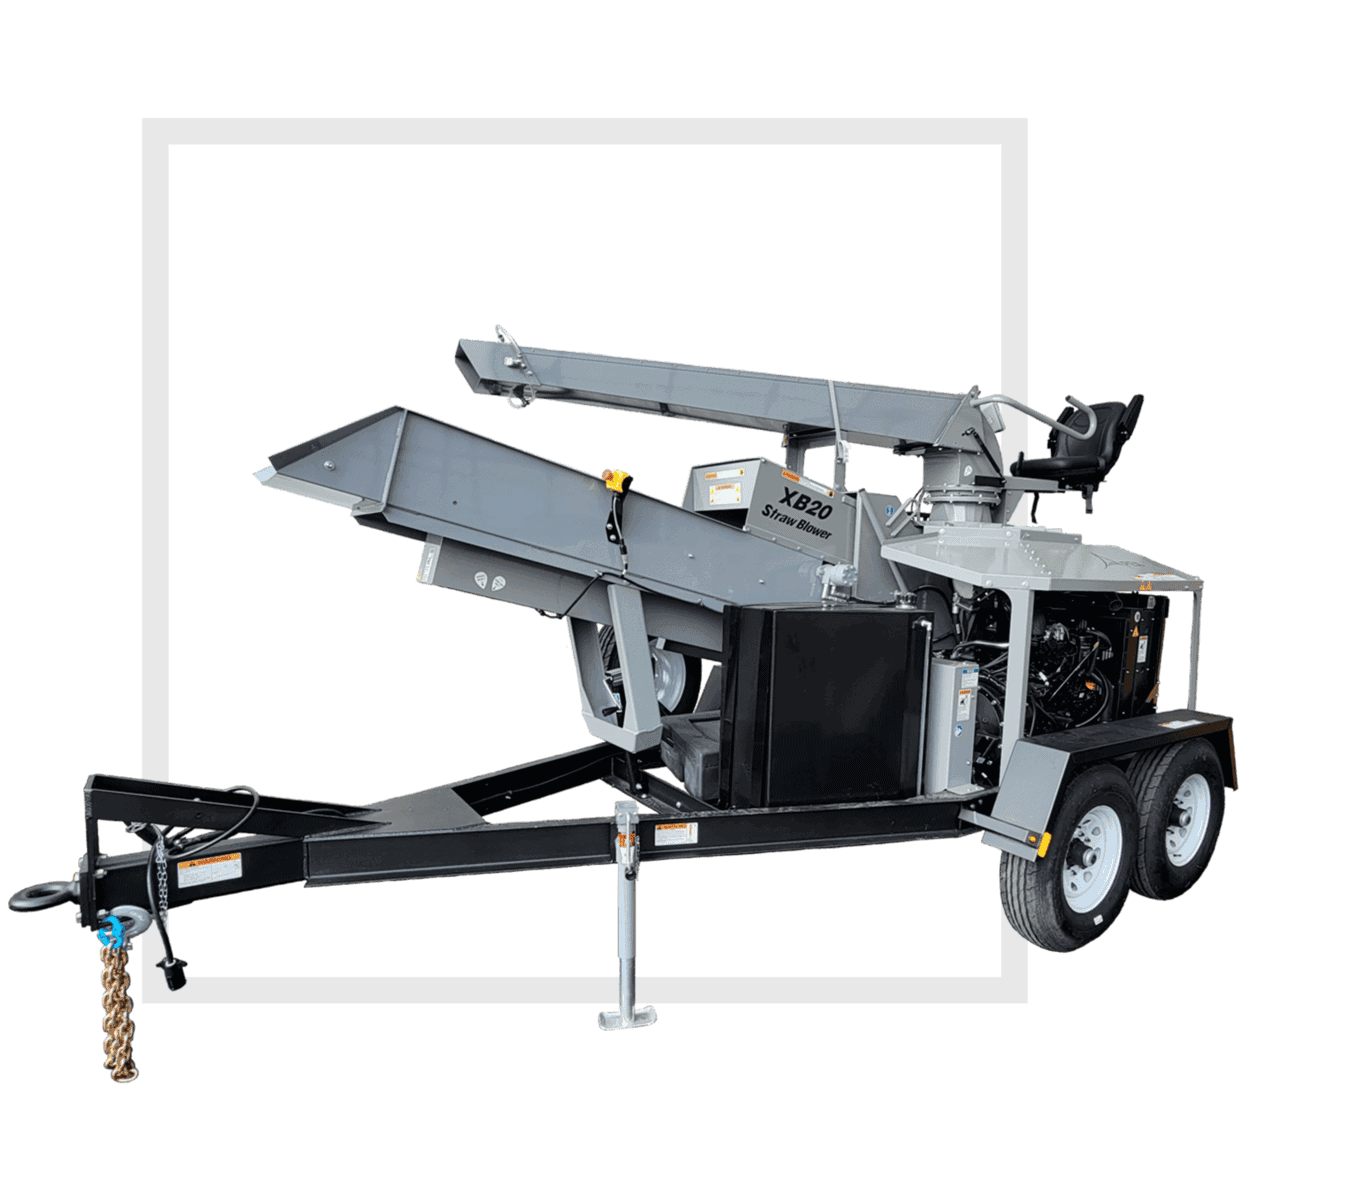 Image of a straw blower. The straw blower sits ontop of a trailer with two wheels on either side. The straw blower is a light grey colour with two long rectangular pieces for receiving and blowing straw.